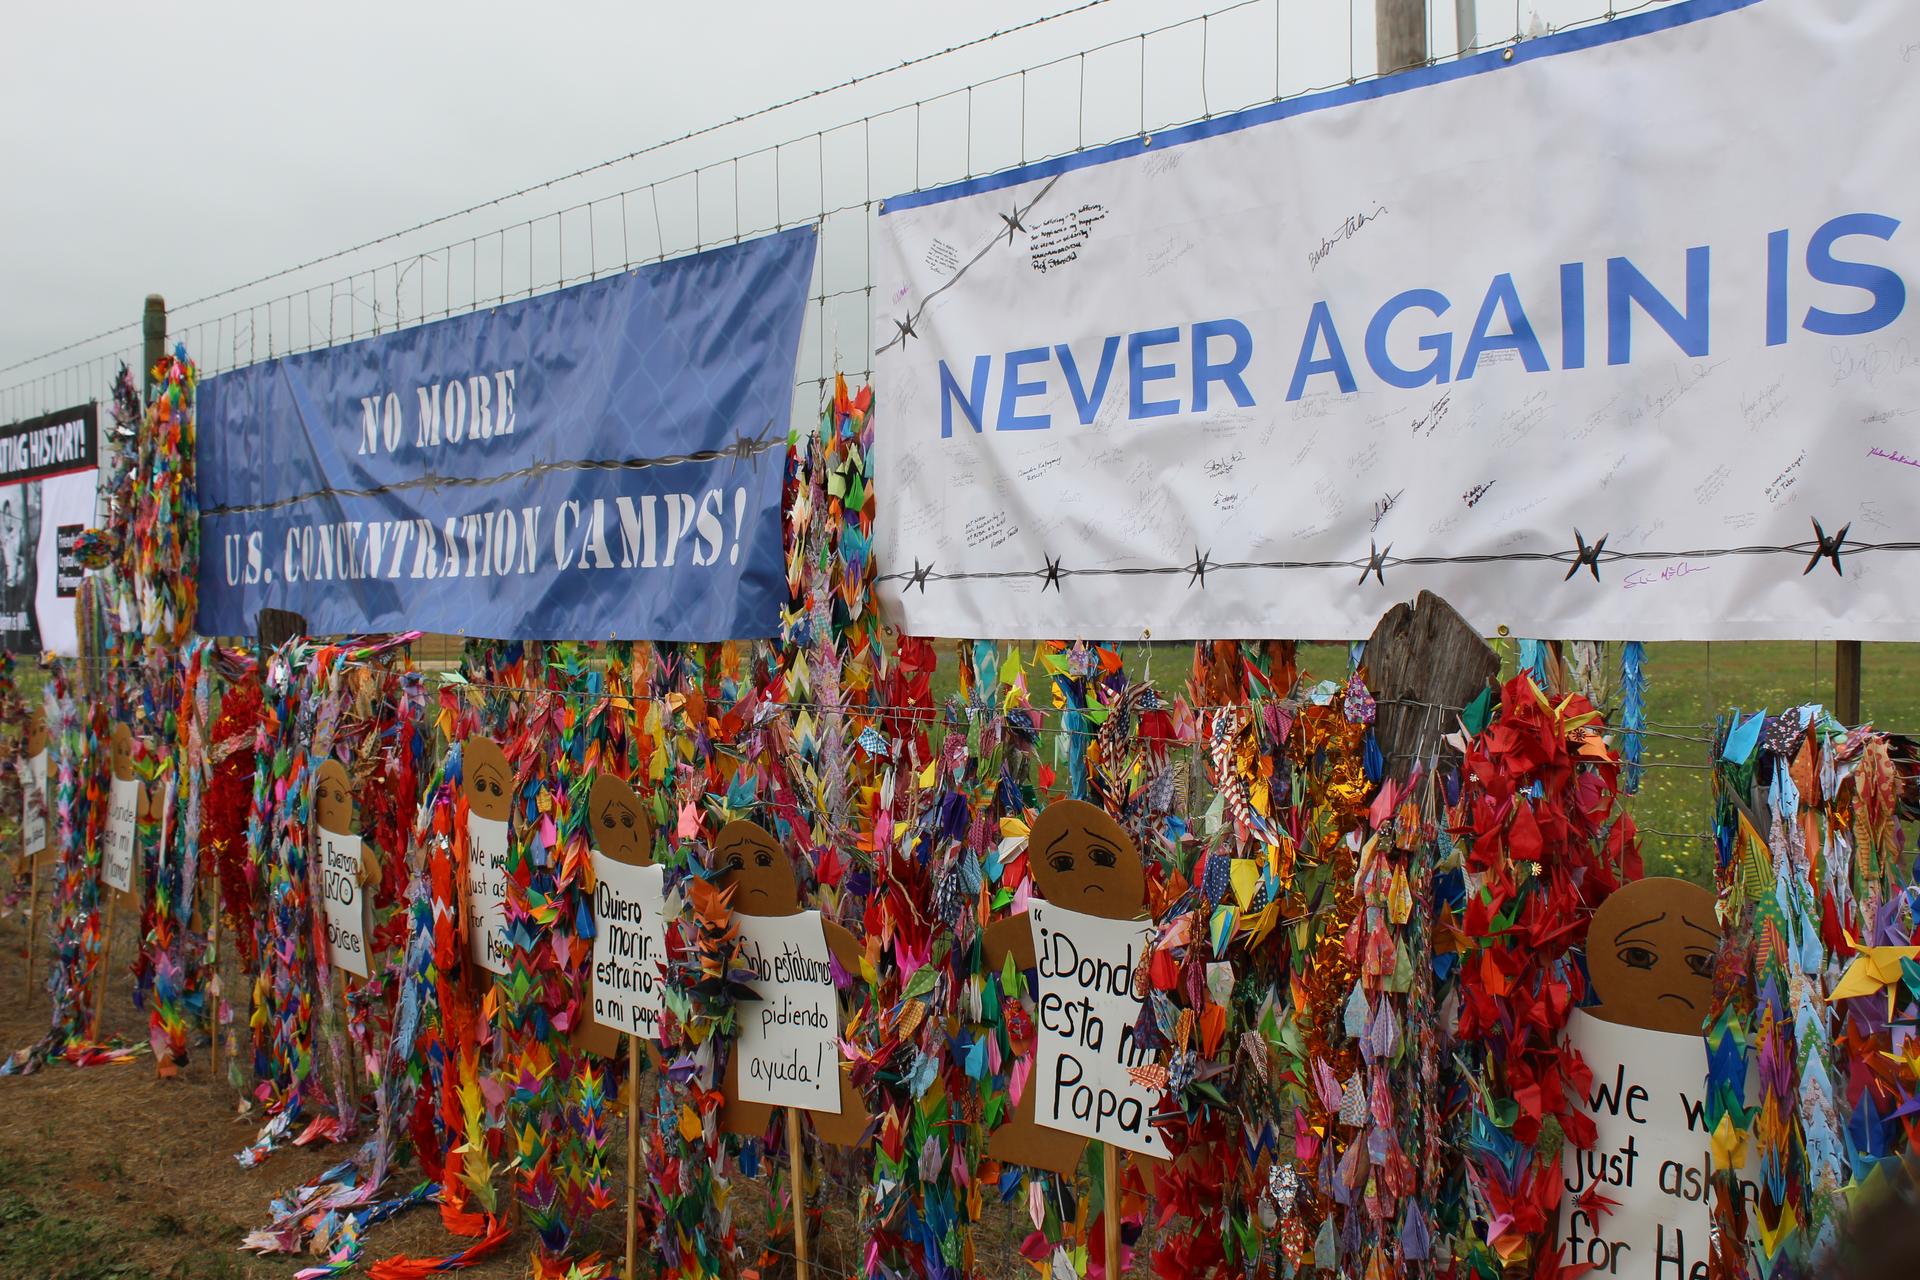 A fence strung with signs and paper cranes